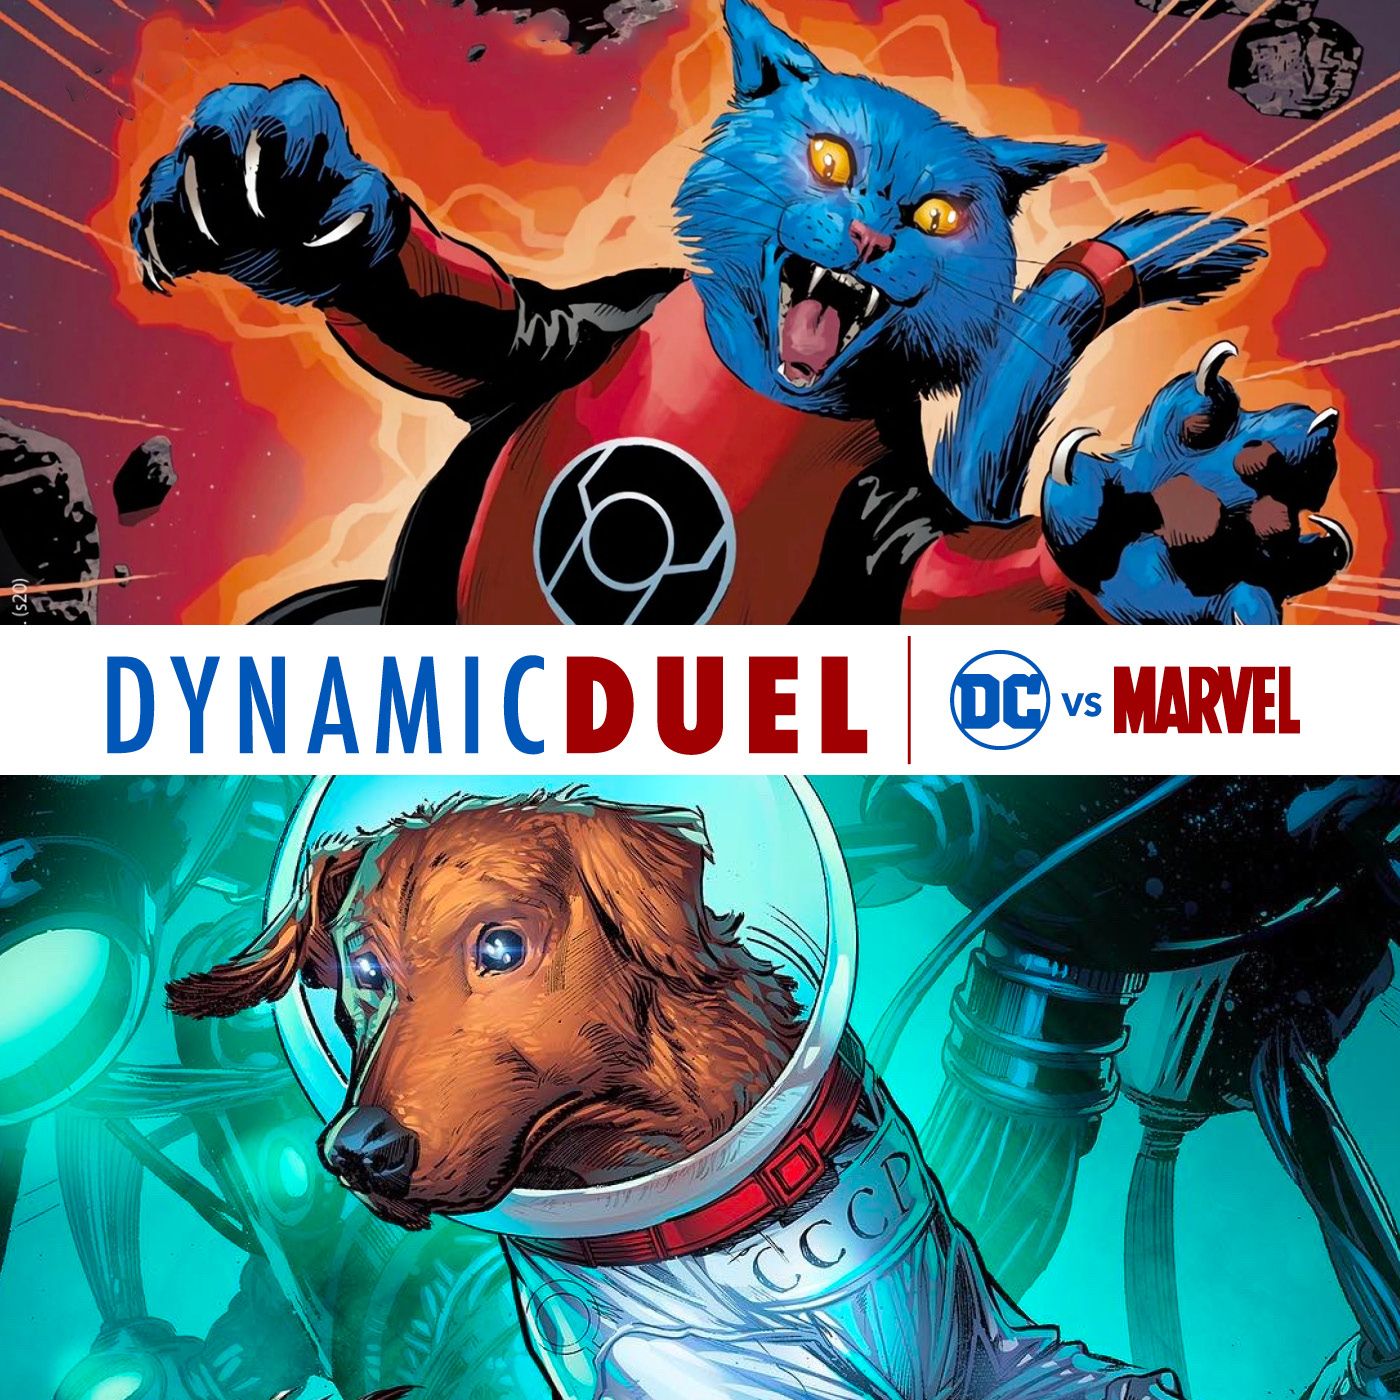 Red Lantern (Dex-Starr) vs Cosmo the Spacedog